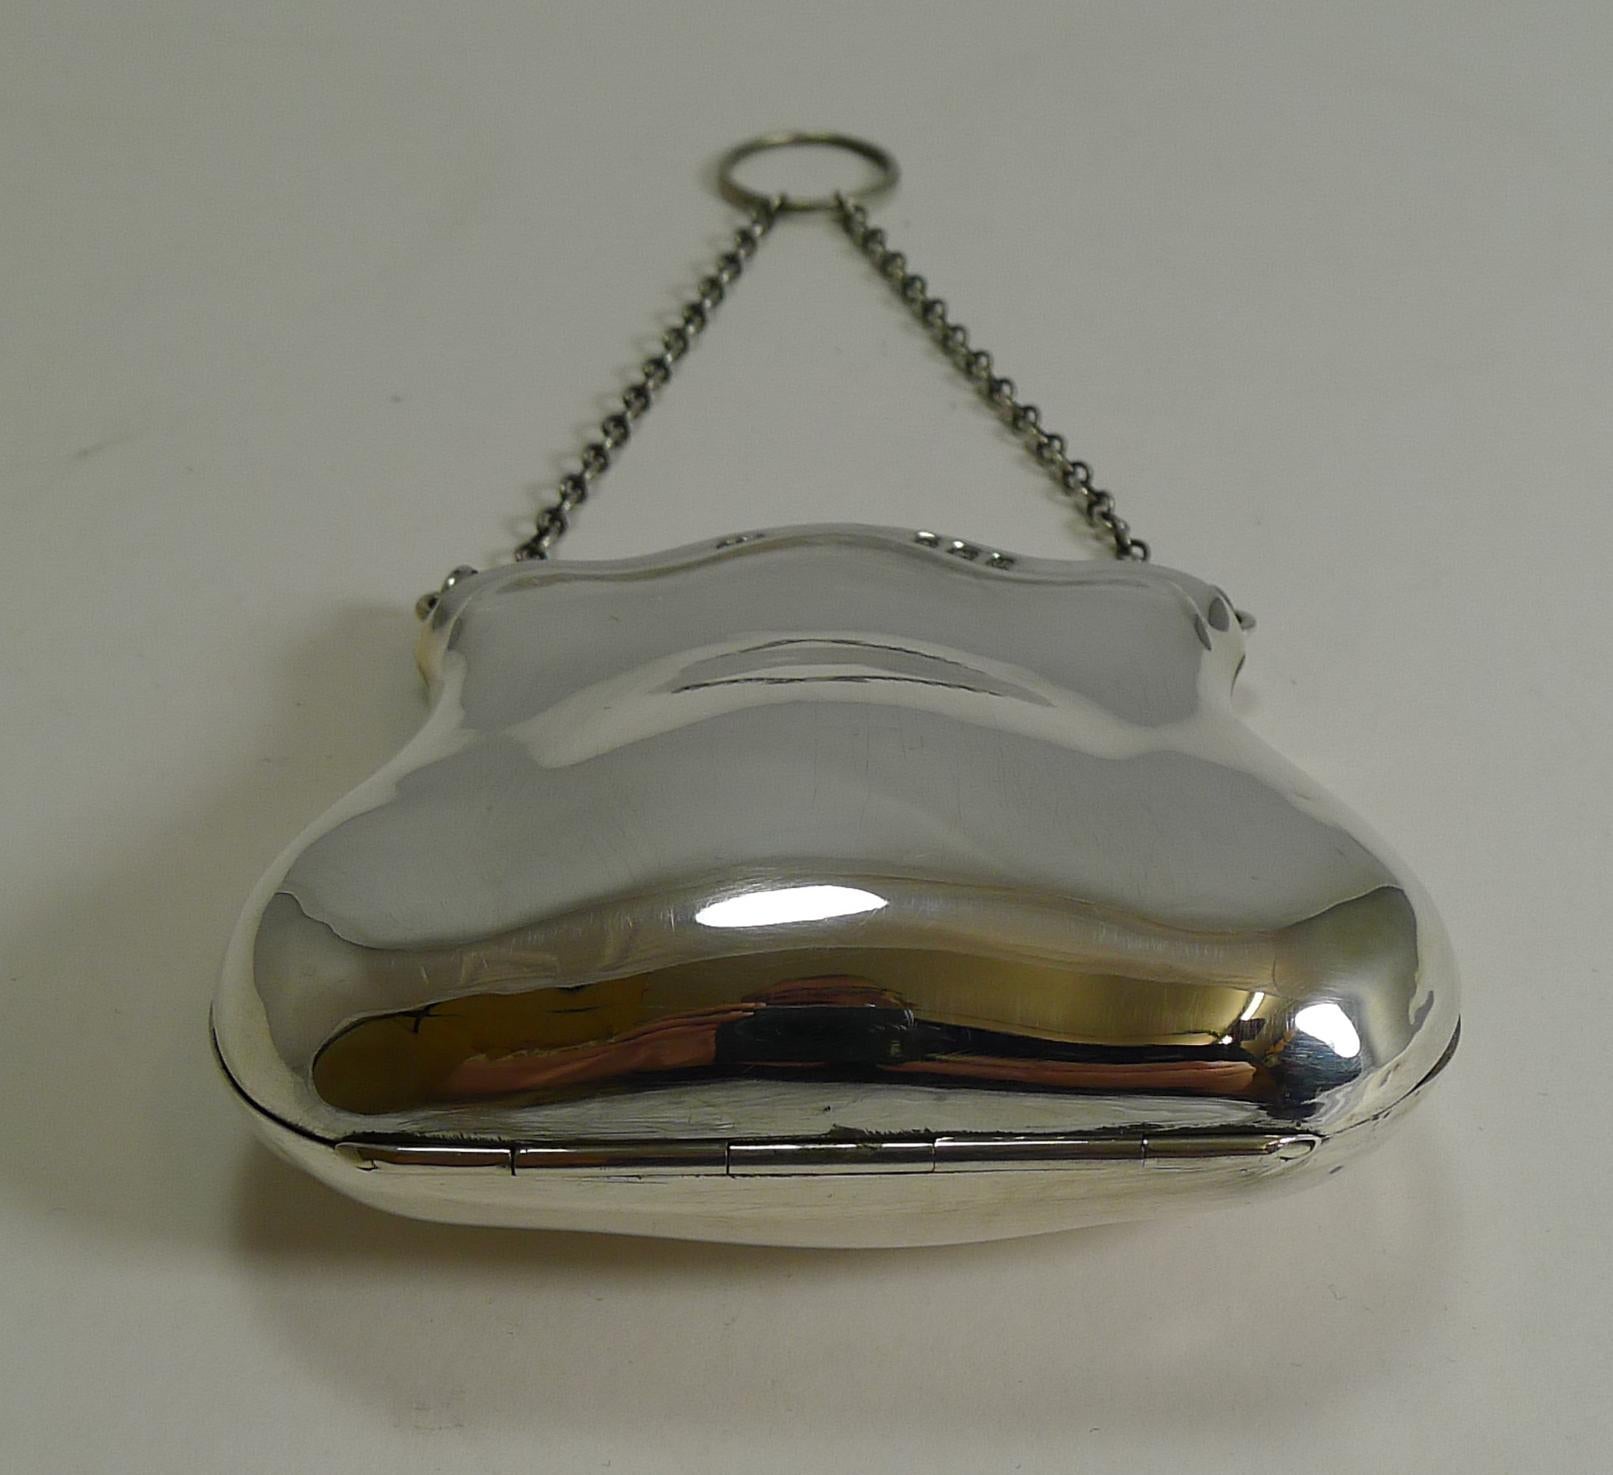 This beautifully shaped purse with it's simplistic design creates a really elegant example.

Made from English sterling silver including the chain and finger ring, it is fully hallmarked for Birmingham 1919; the makers initials are also present